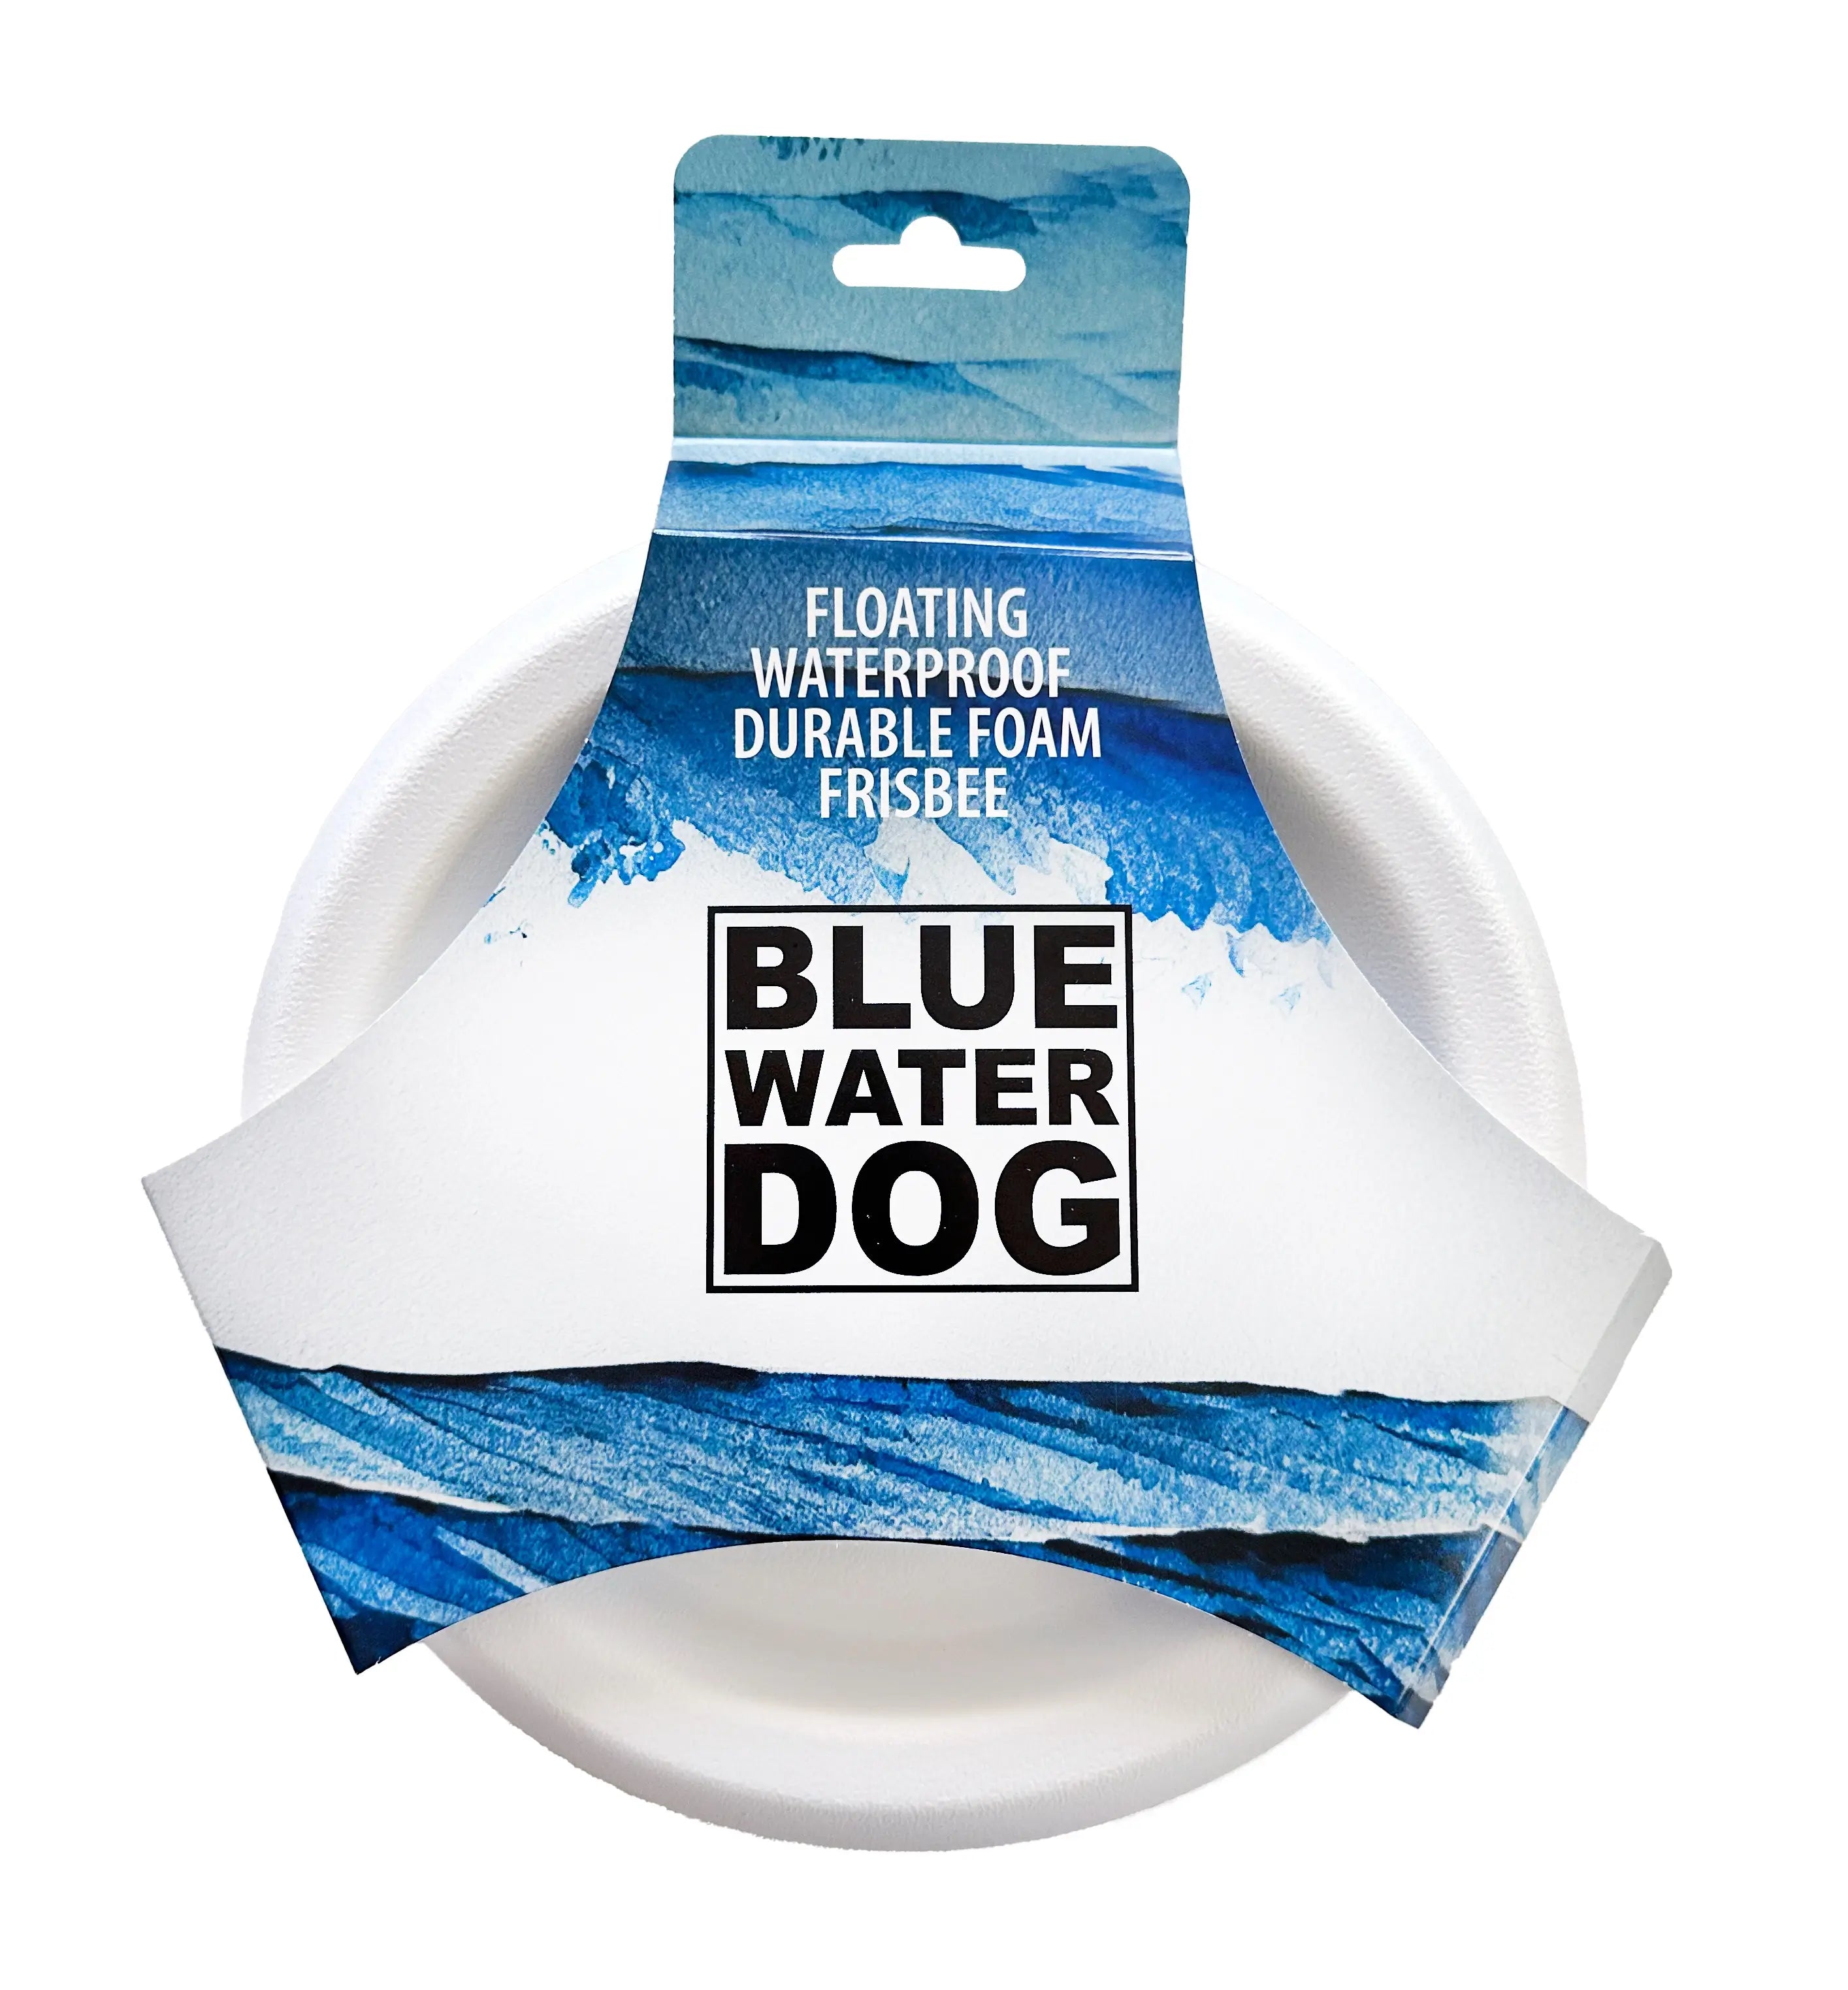 White dog frisbee in packaging.